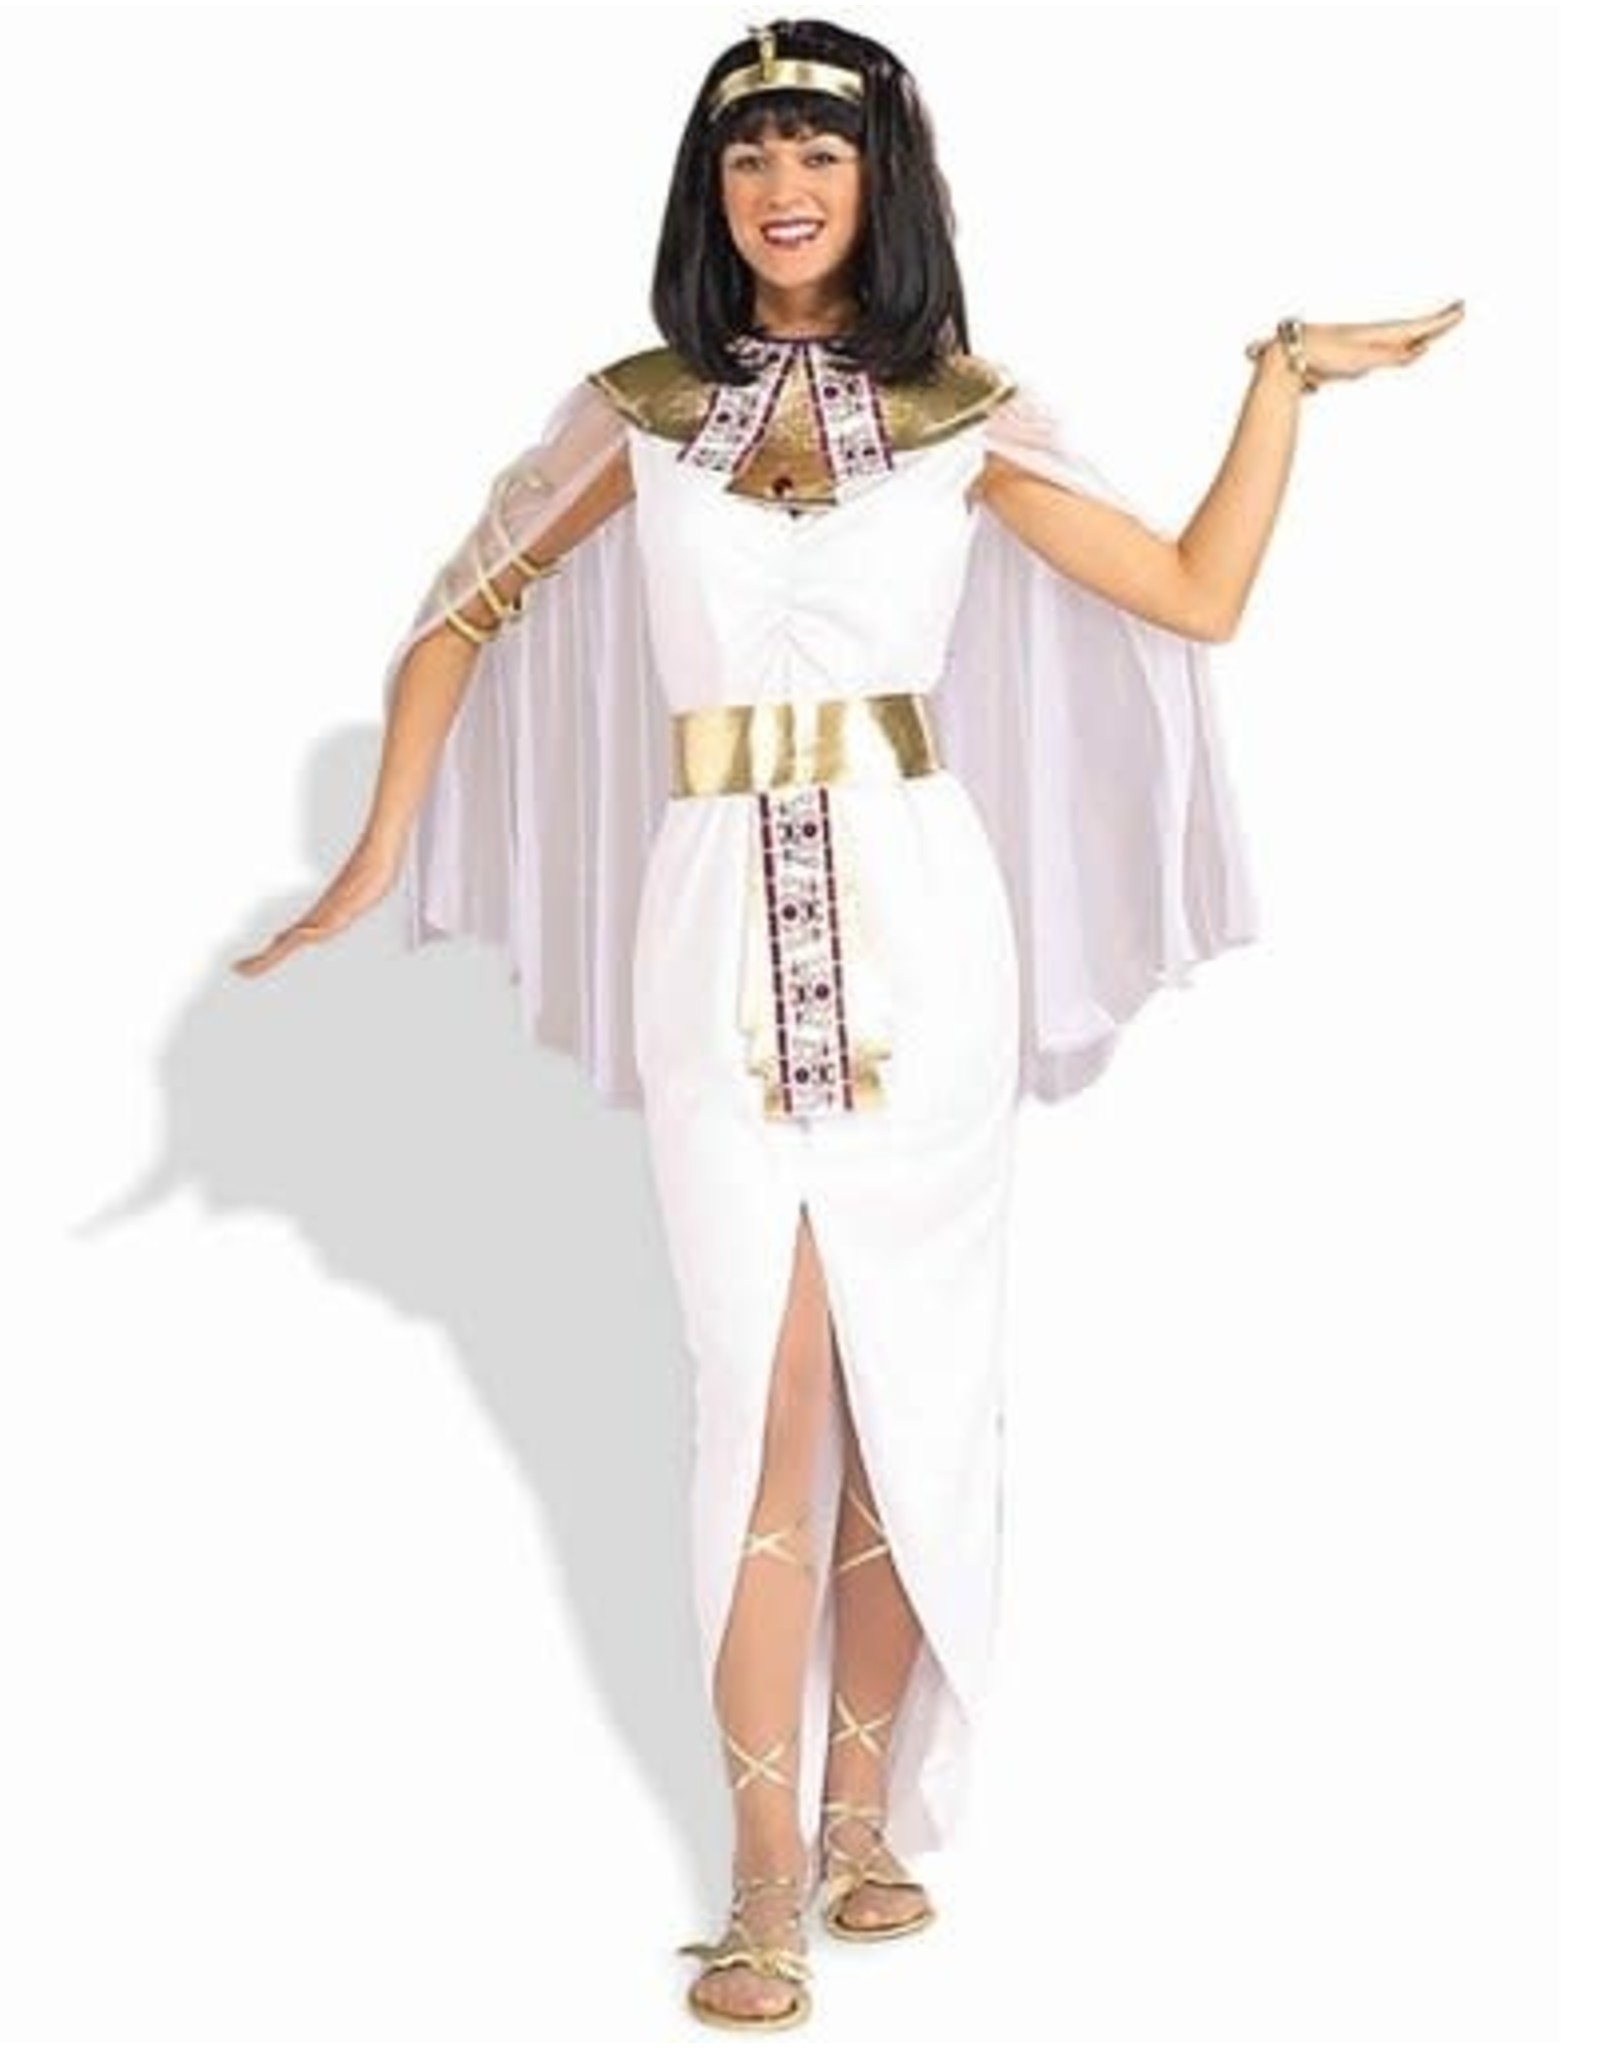 Costumania Cleopatra, White, Osfm - One Size Fits Most